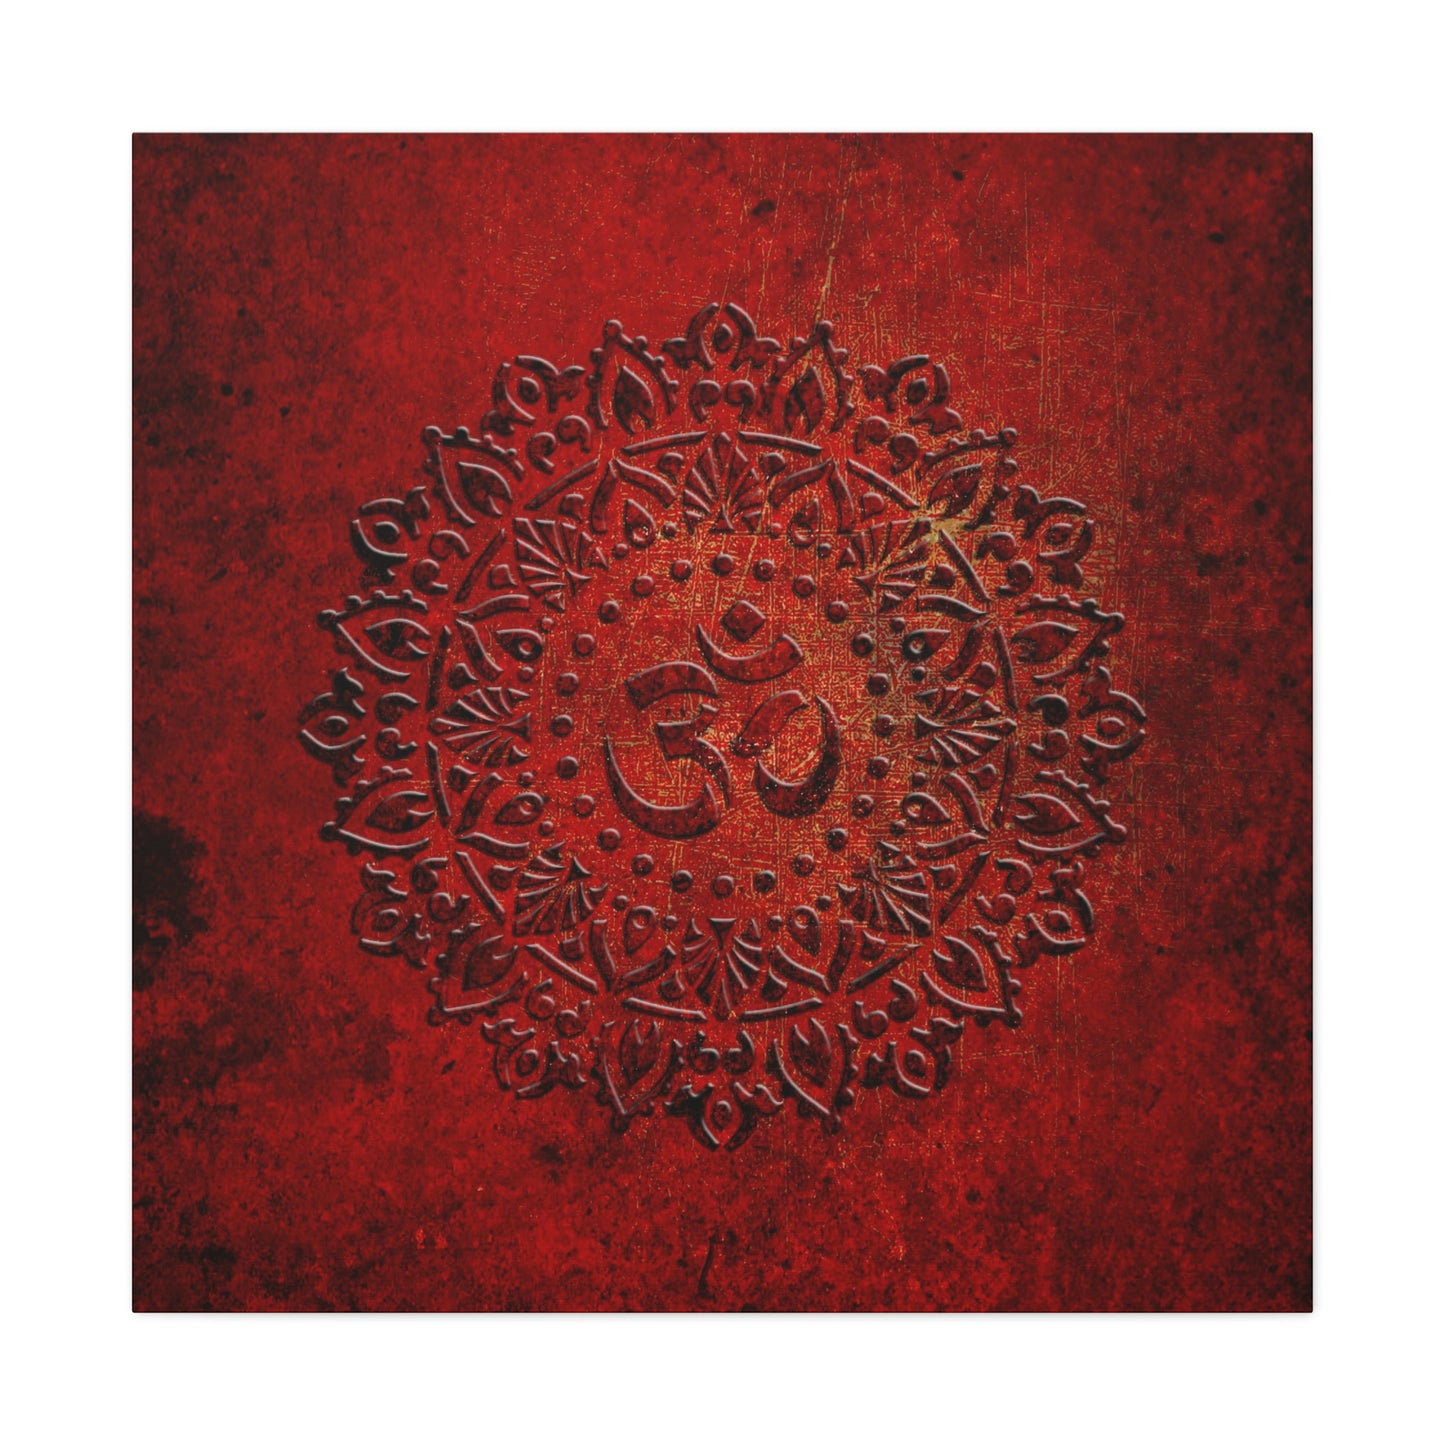 Om Symbol Mandala Style on Lava Red Background Printed on Unframed Stretched Canvas 5 sizes available